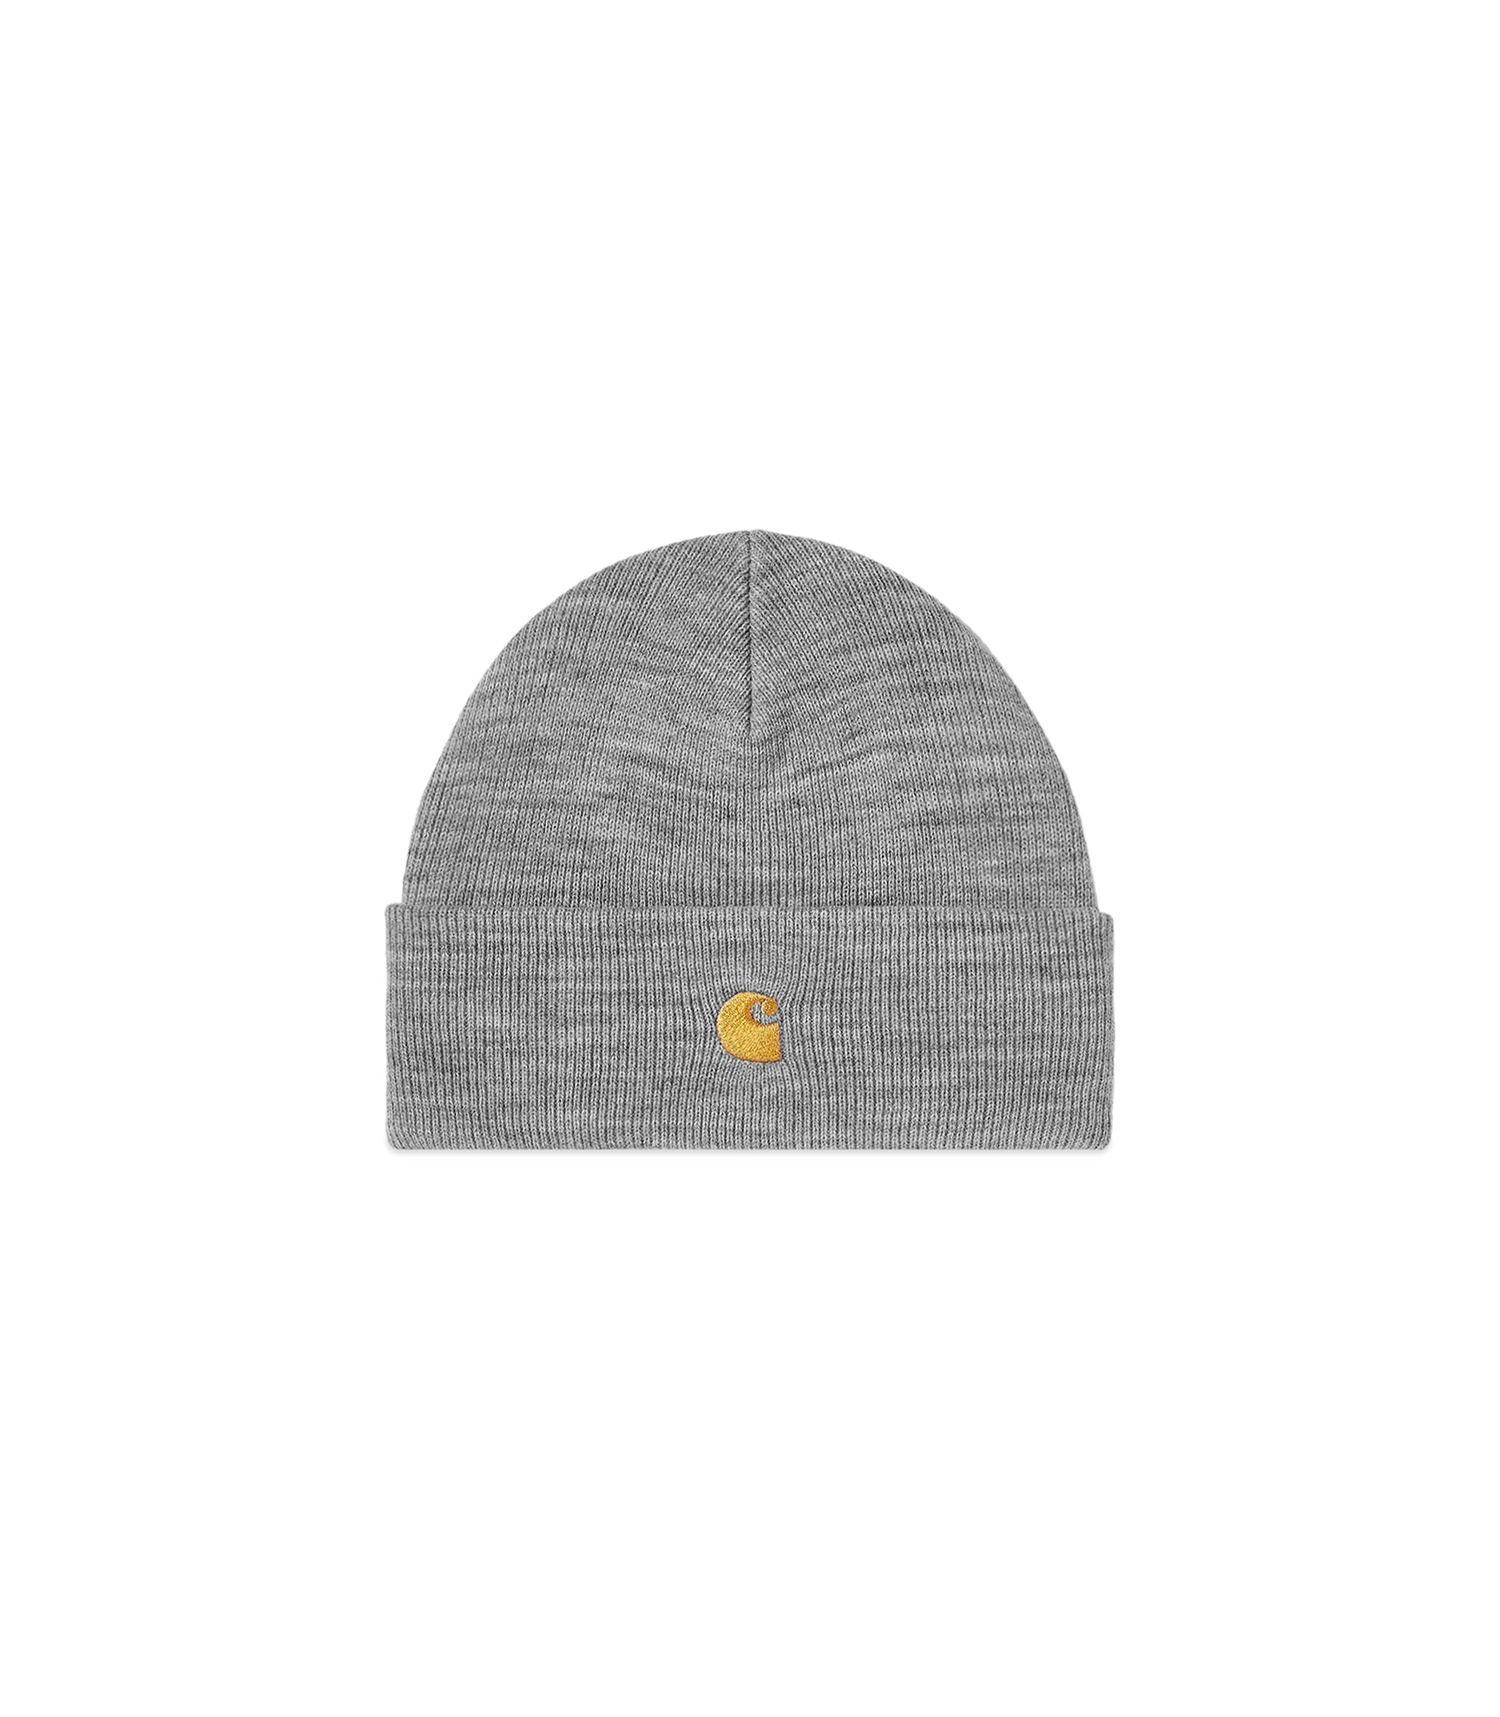 Chase Beanie - Gray Heather / Gold